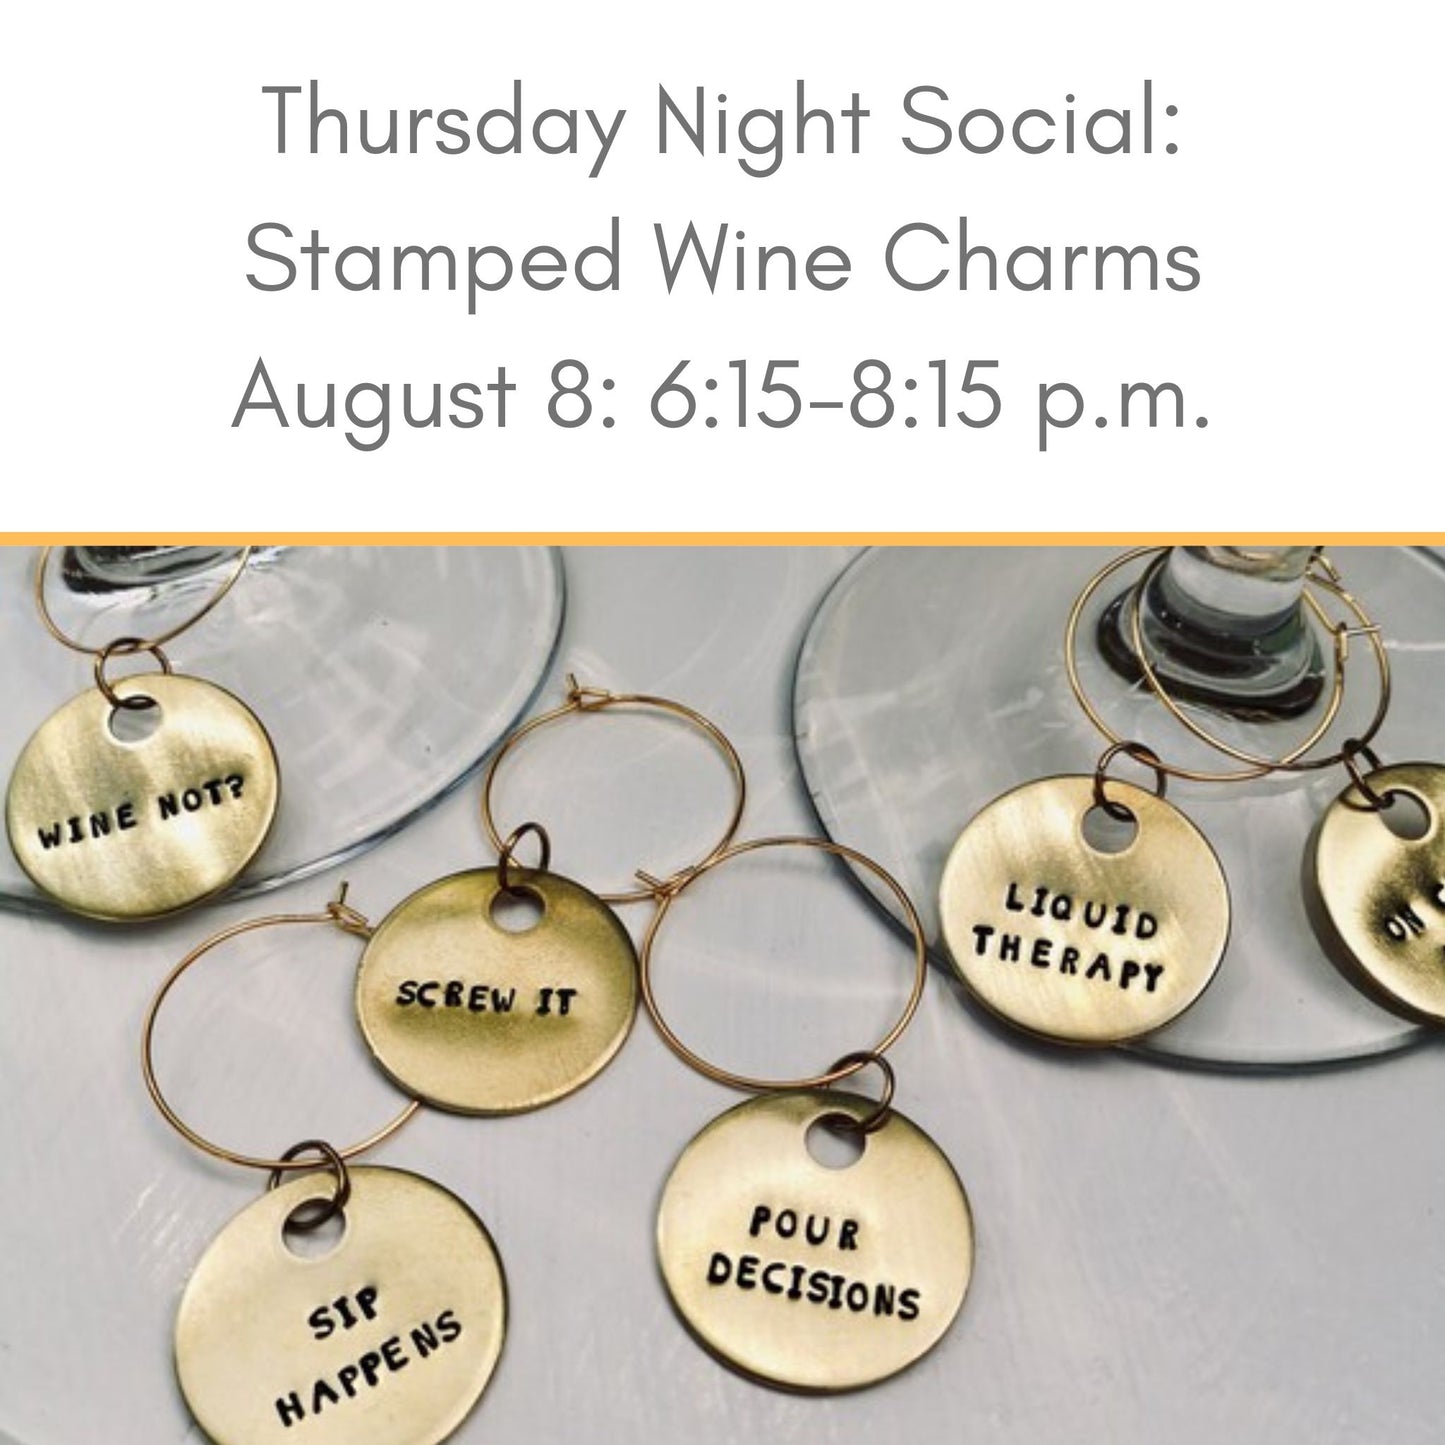 Stamped wine charms August 8 at Silver Peak Studio and Gallery